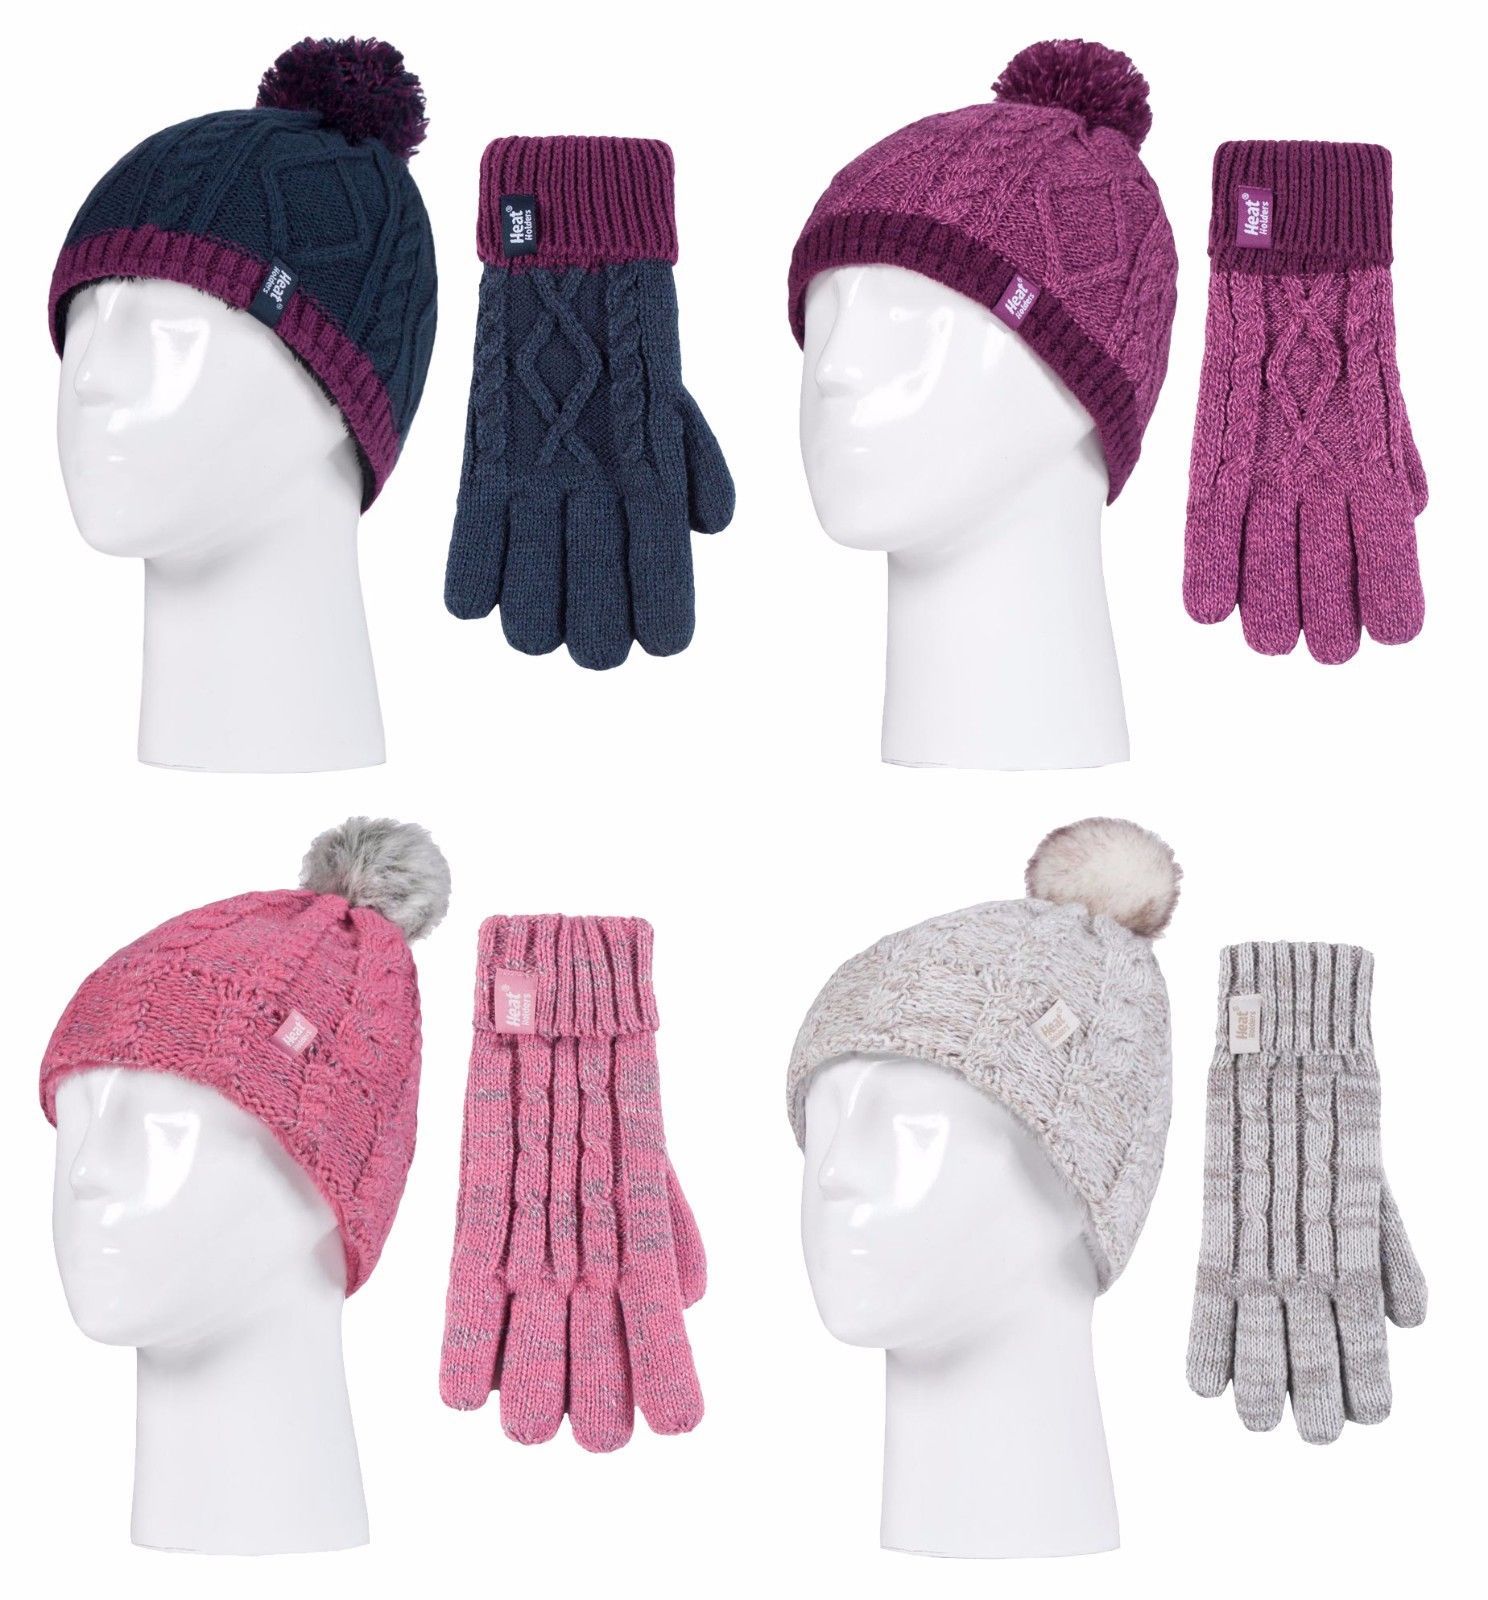 Heat Holders - Kids Girls Cable Knitted Thermal Winter Beanie Hat and Gloves Set